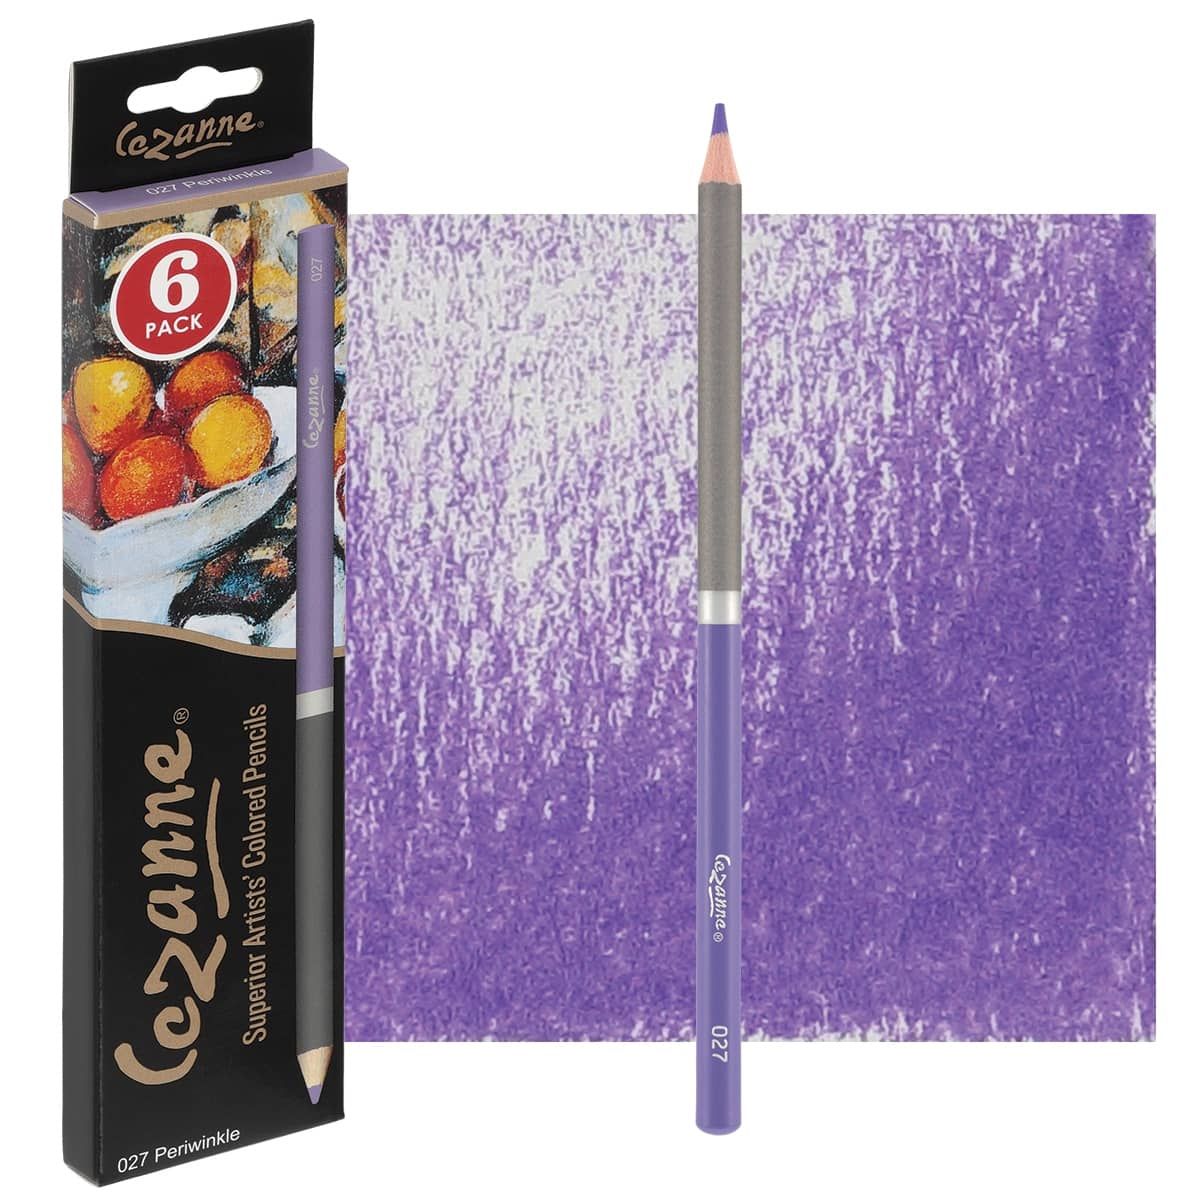 Colors release easily onto paper, board, or canvas